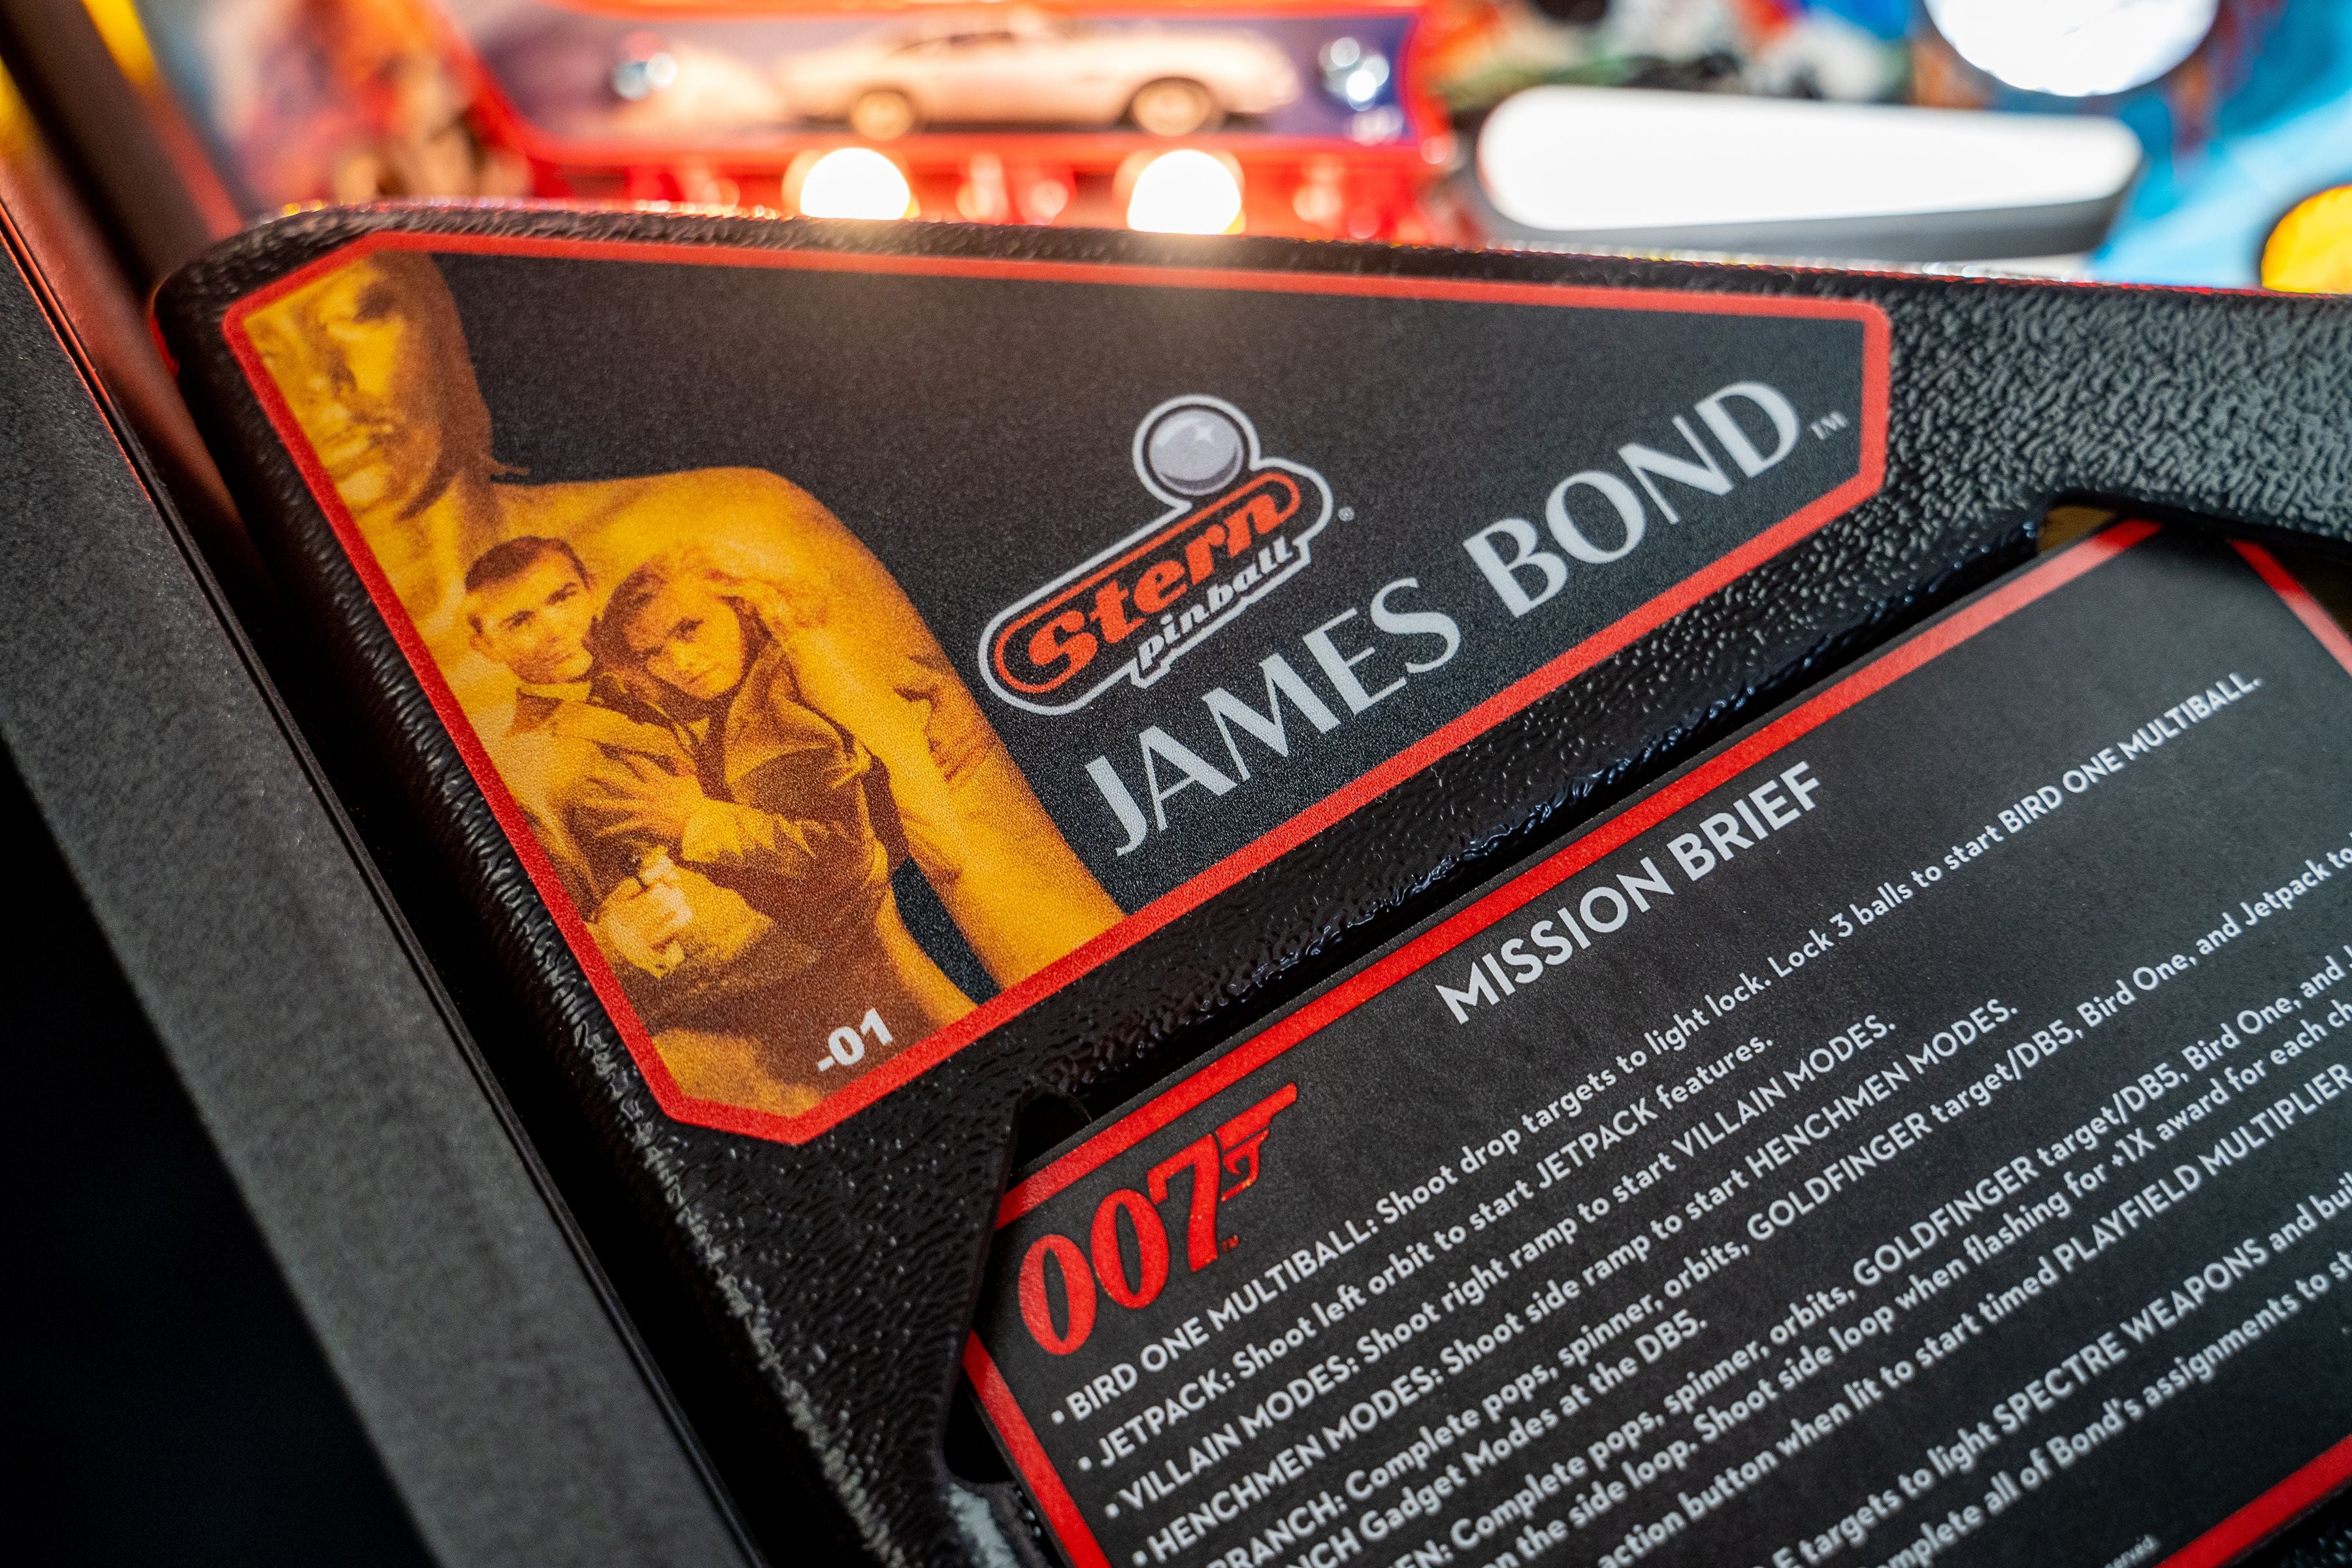 JAMES BOND 007 (Dr. NO) PRO - IN STOCK!